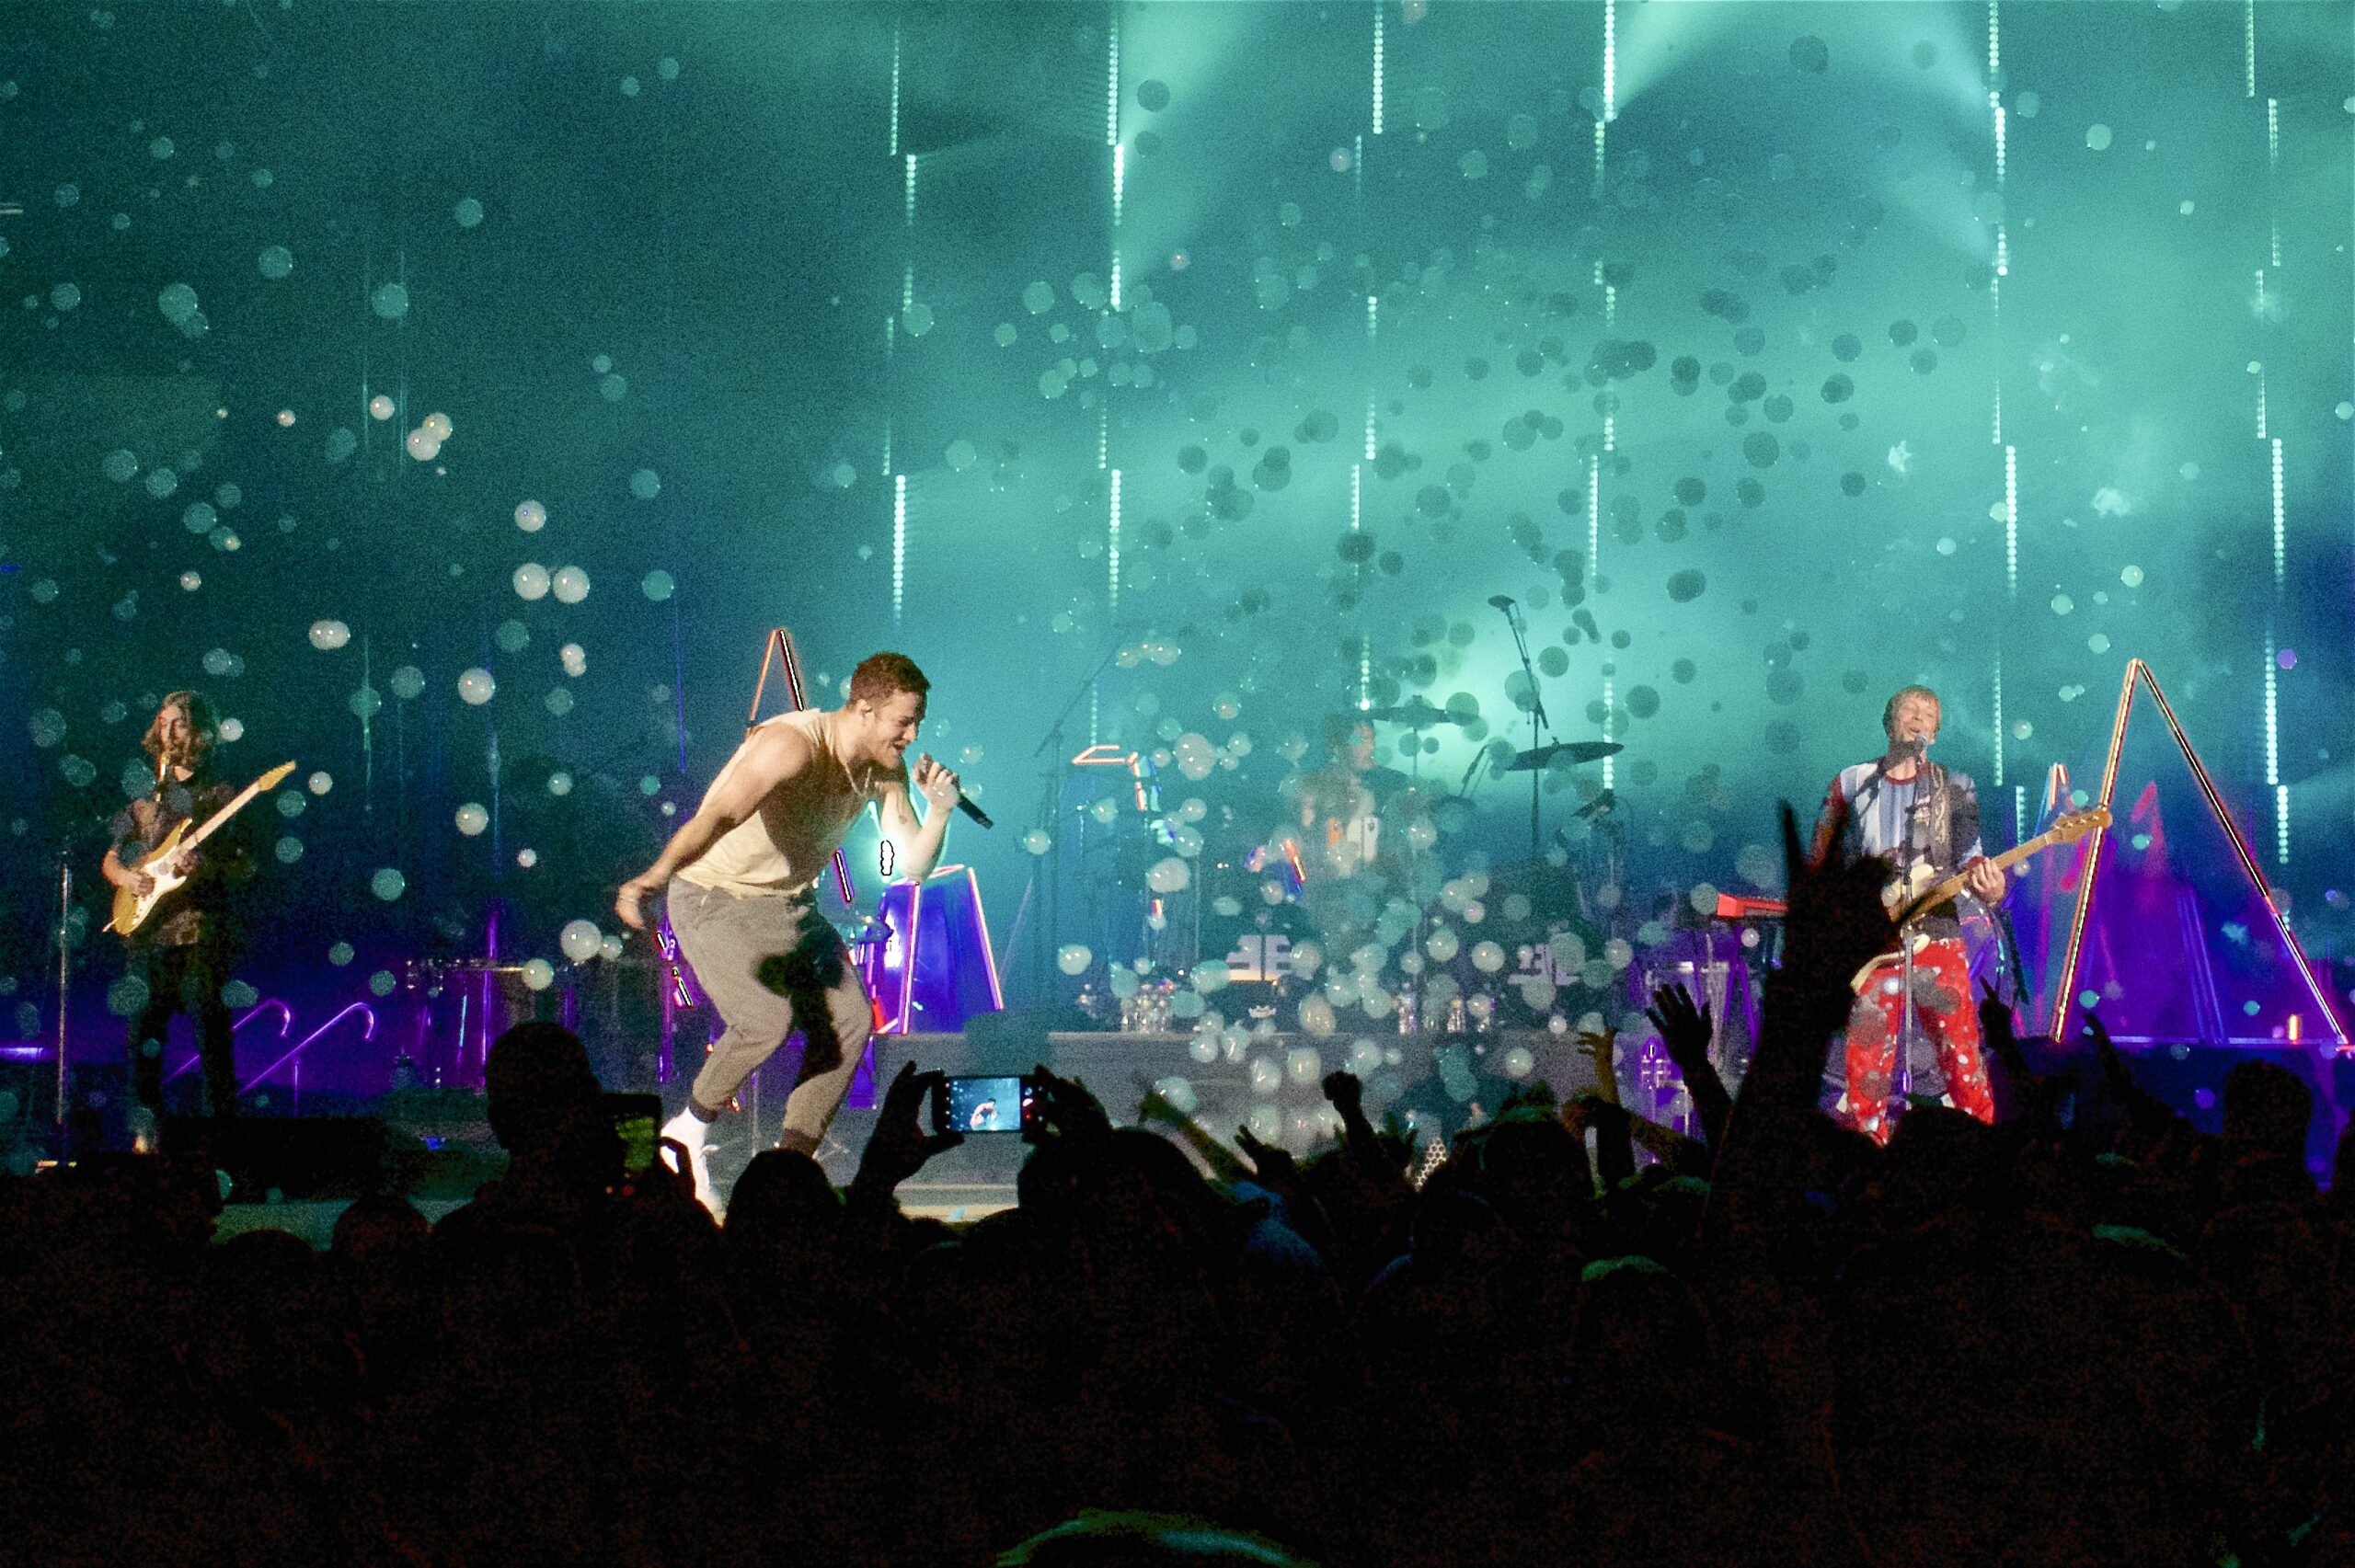 Prepare Yourself For An Incredible Experience at An Amazing Imagine Dragons Show!